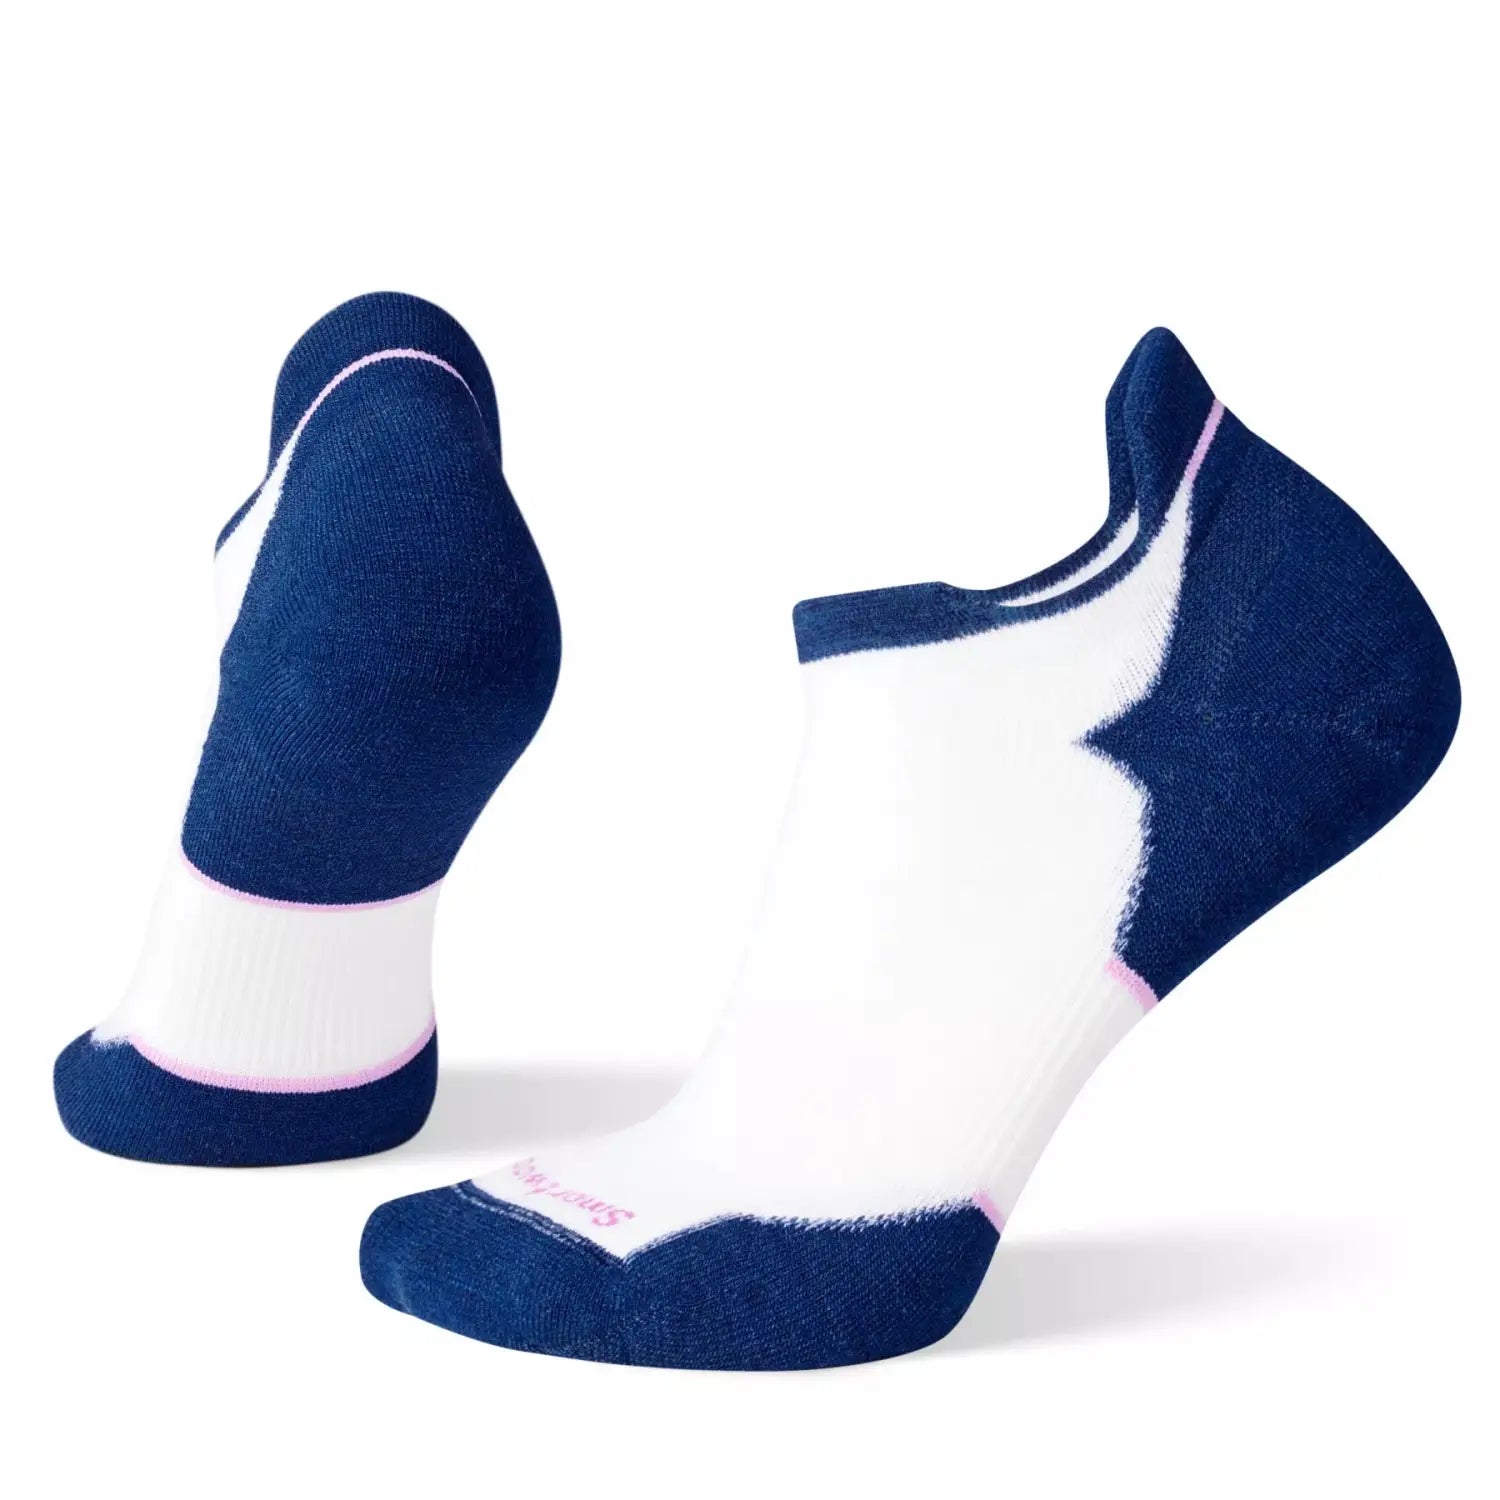 W's Run Targeted Cushion Low Ankle Socks